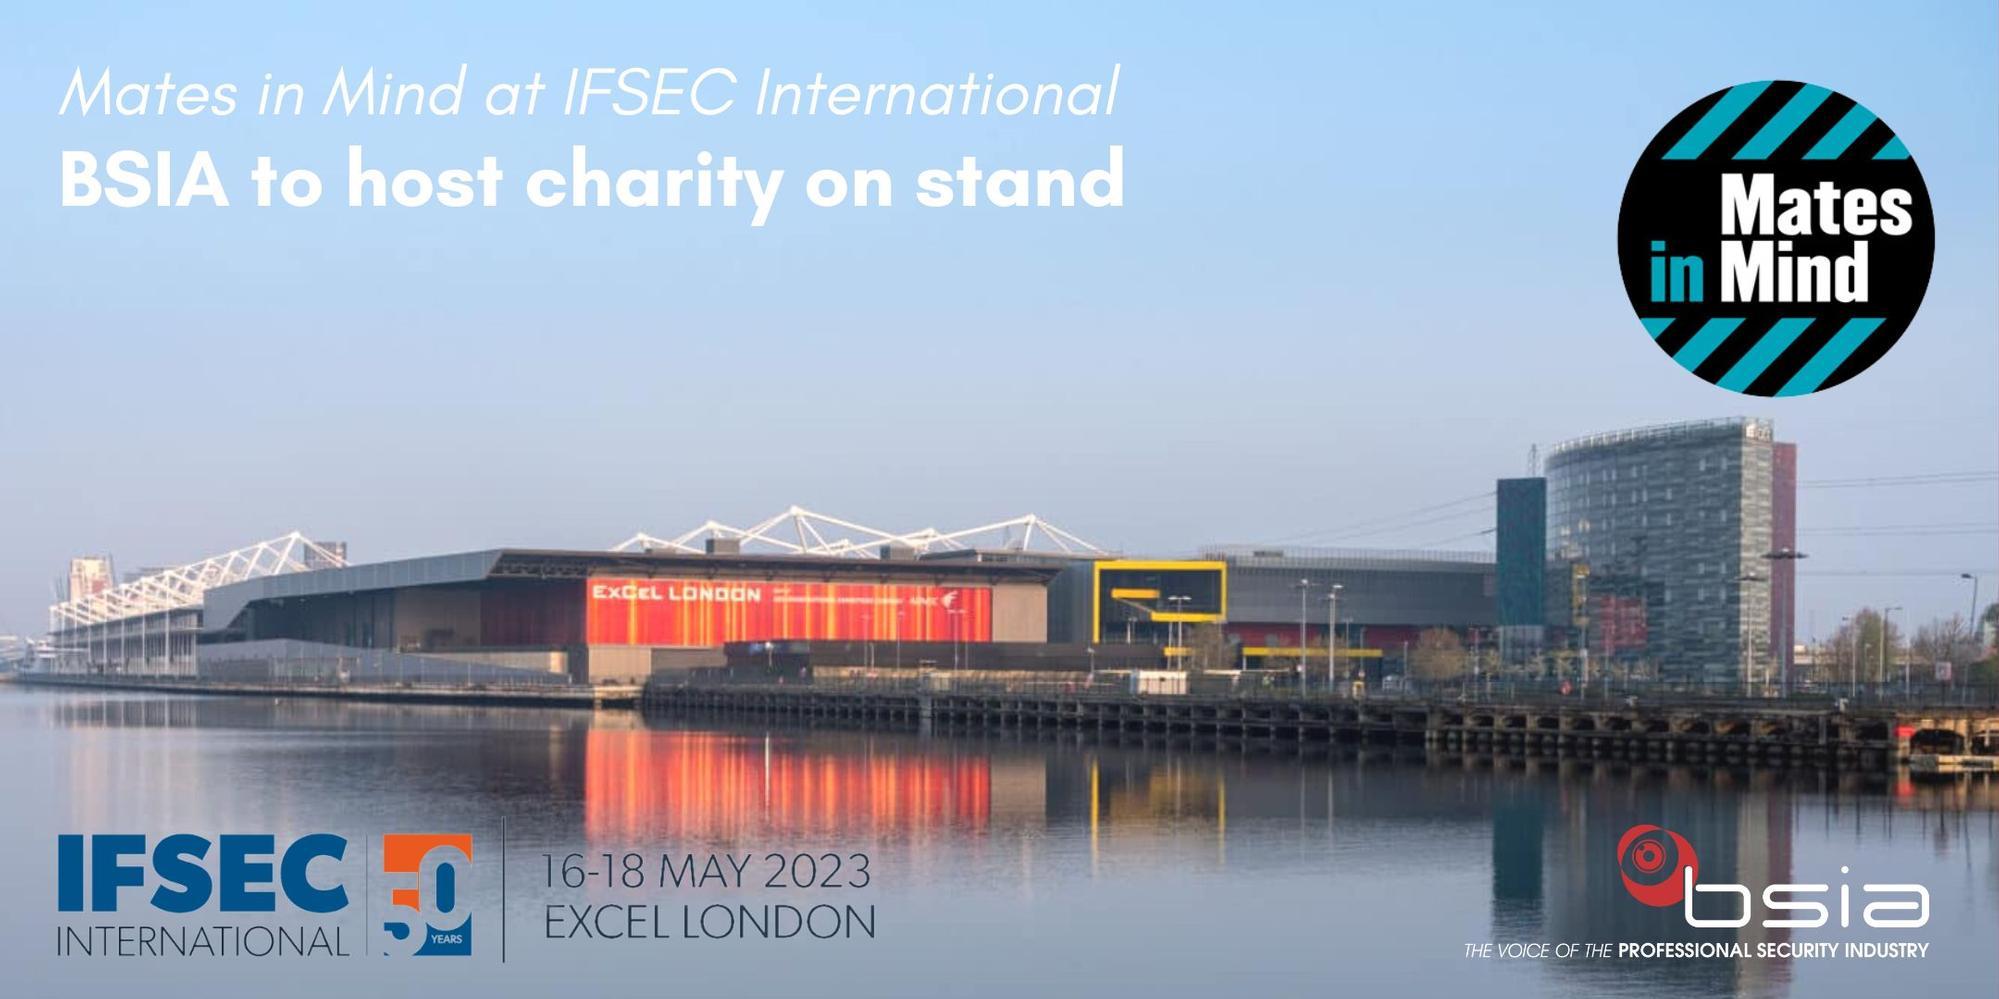 IFSEC and FIREX welcome Mates in Mind